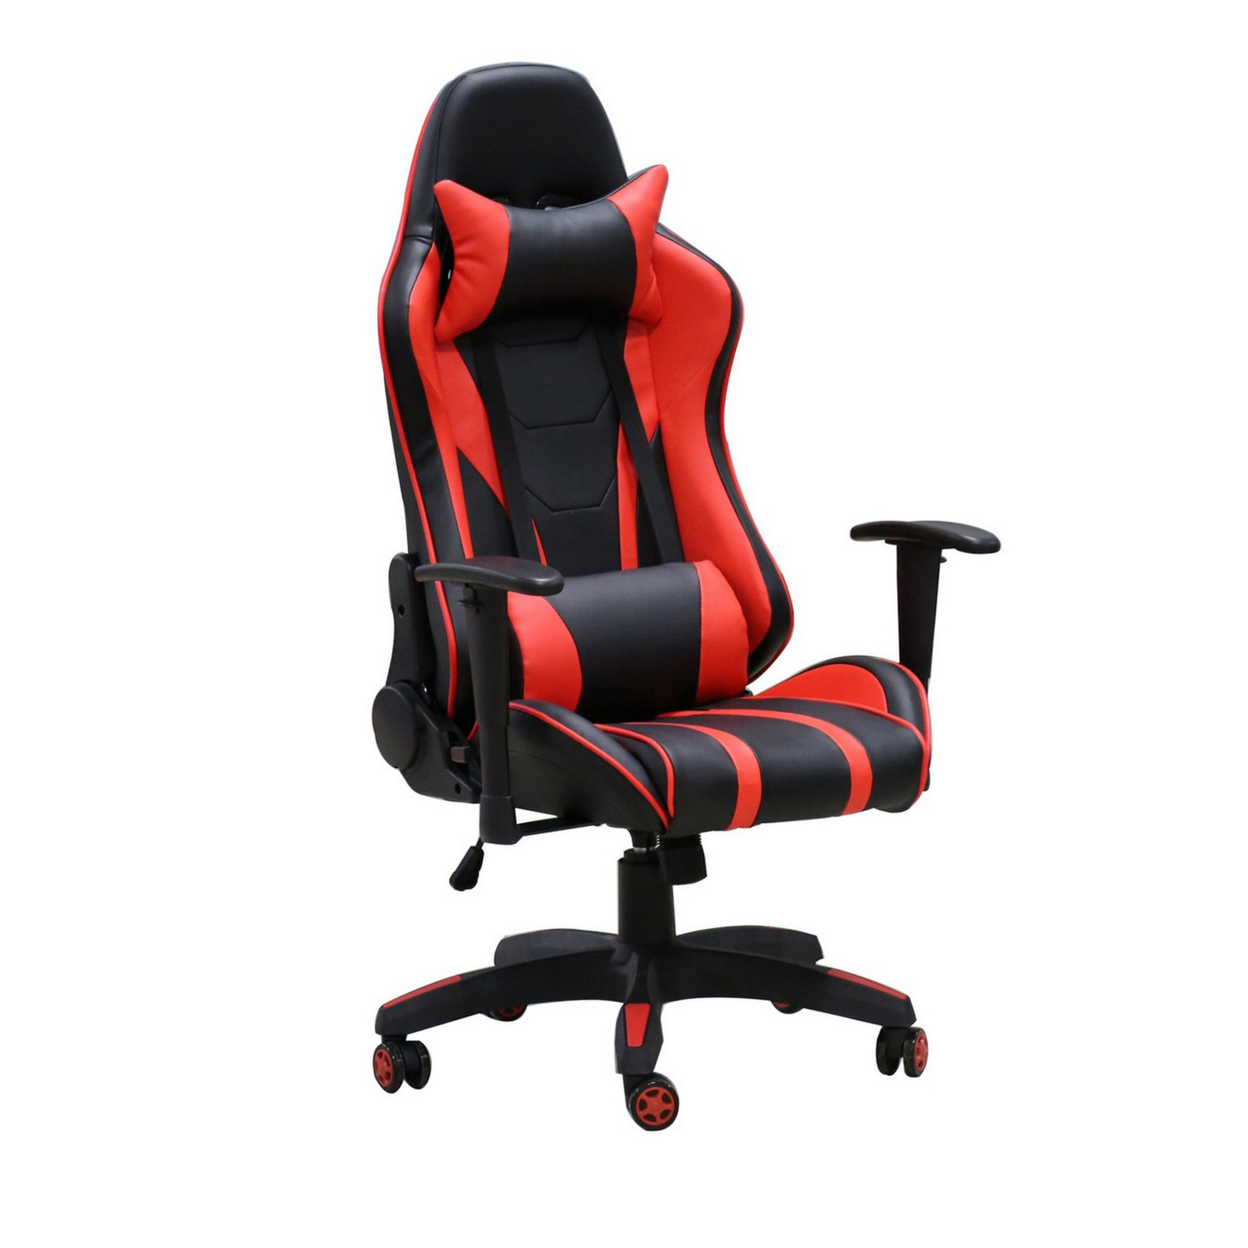 22 Inch Office Gaming Chair, Red, Black Faux Leather With Back Pillows- Saltoro Sherpi